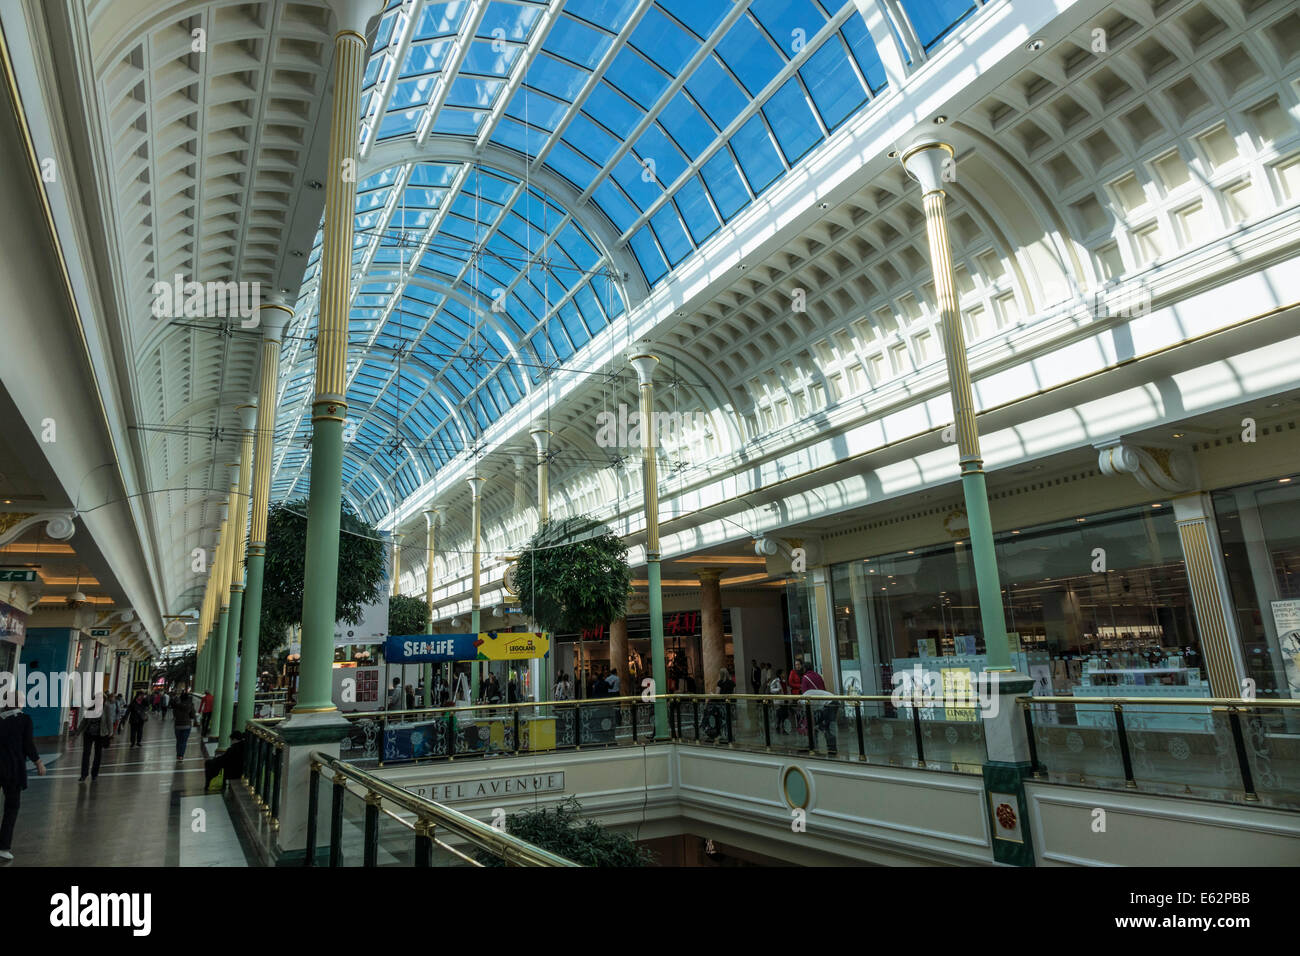 Trafford Centre shopping mall, Manchester, England, UK. Stock Photo